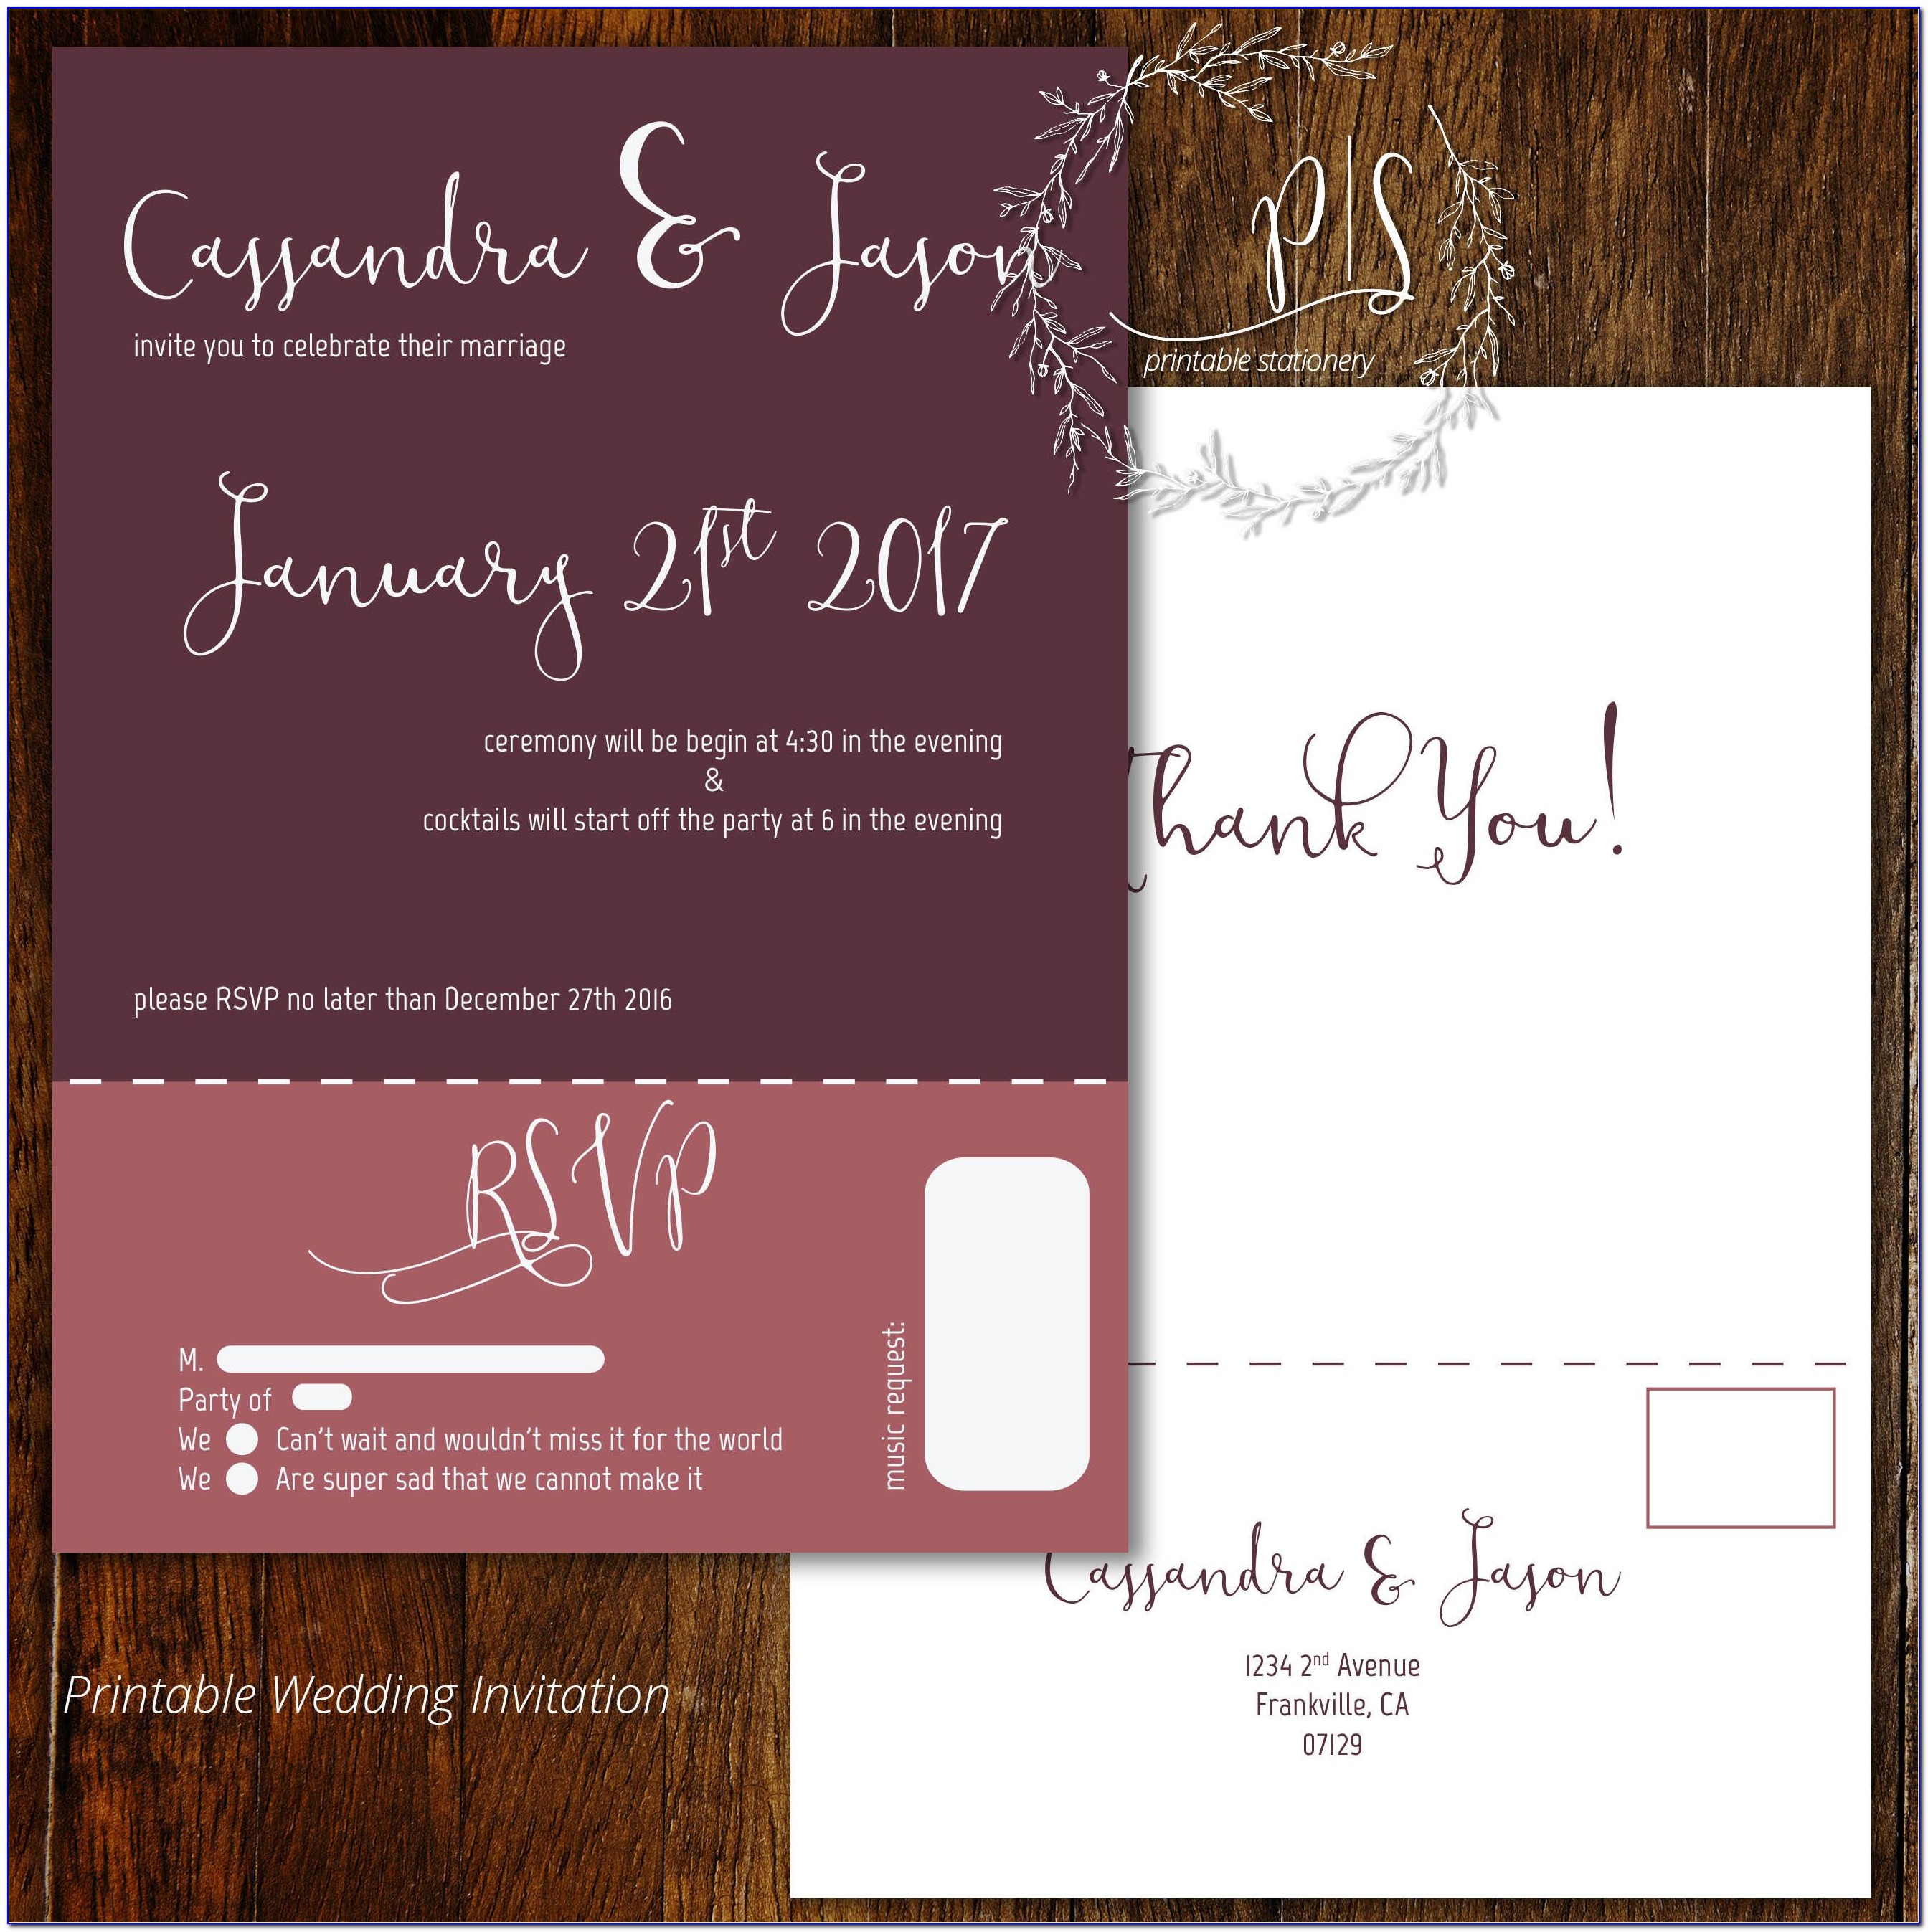 Invitations With Rsvp Attached